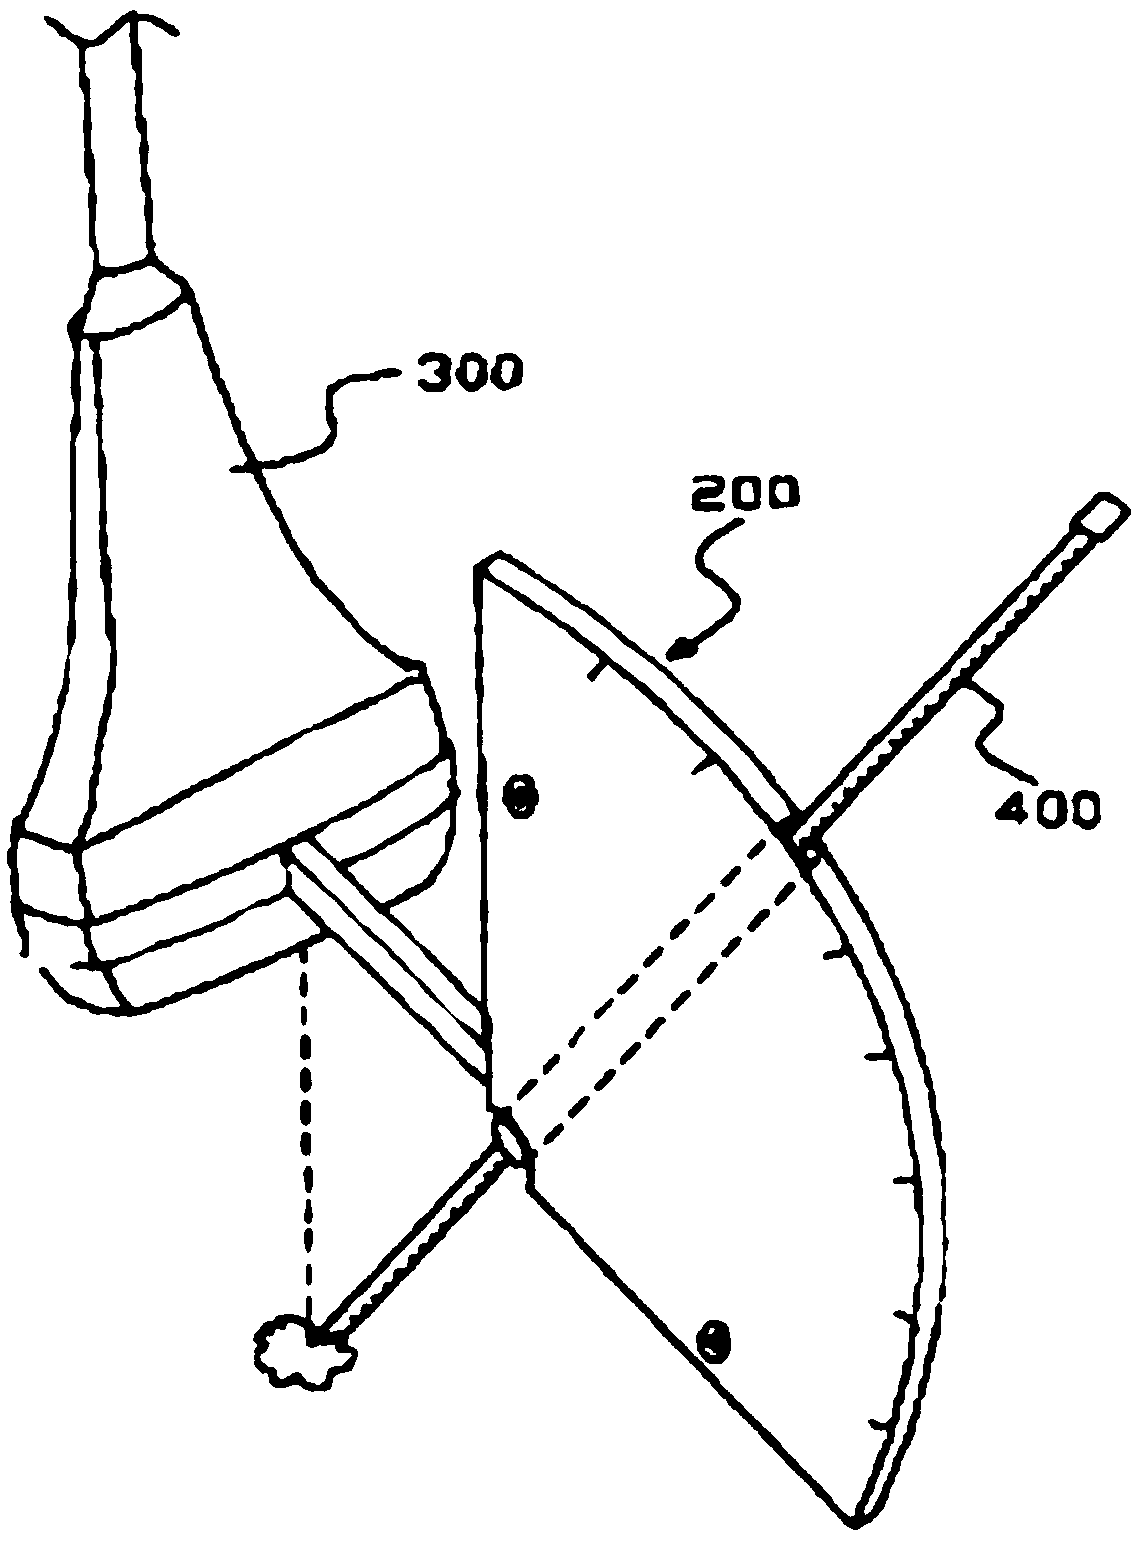 Ultrasound-guided percutaneous puncture bone positioning device